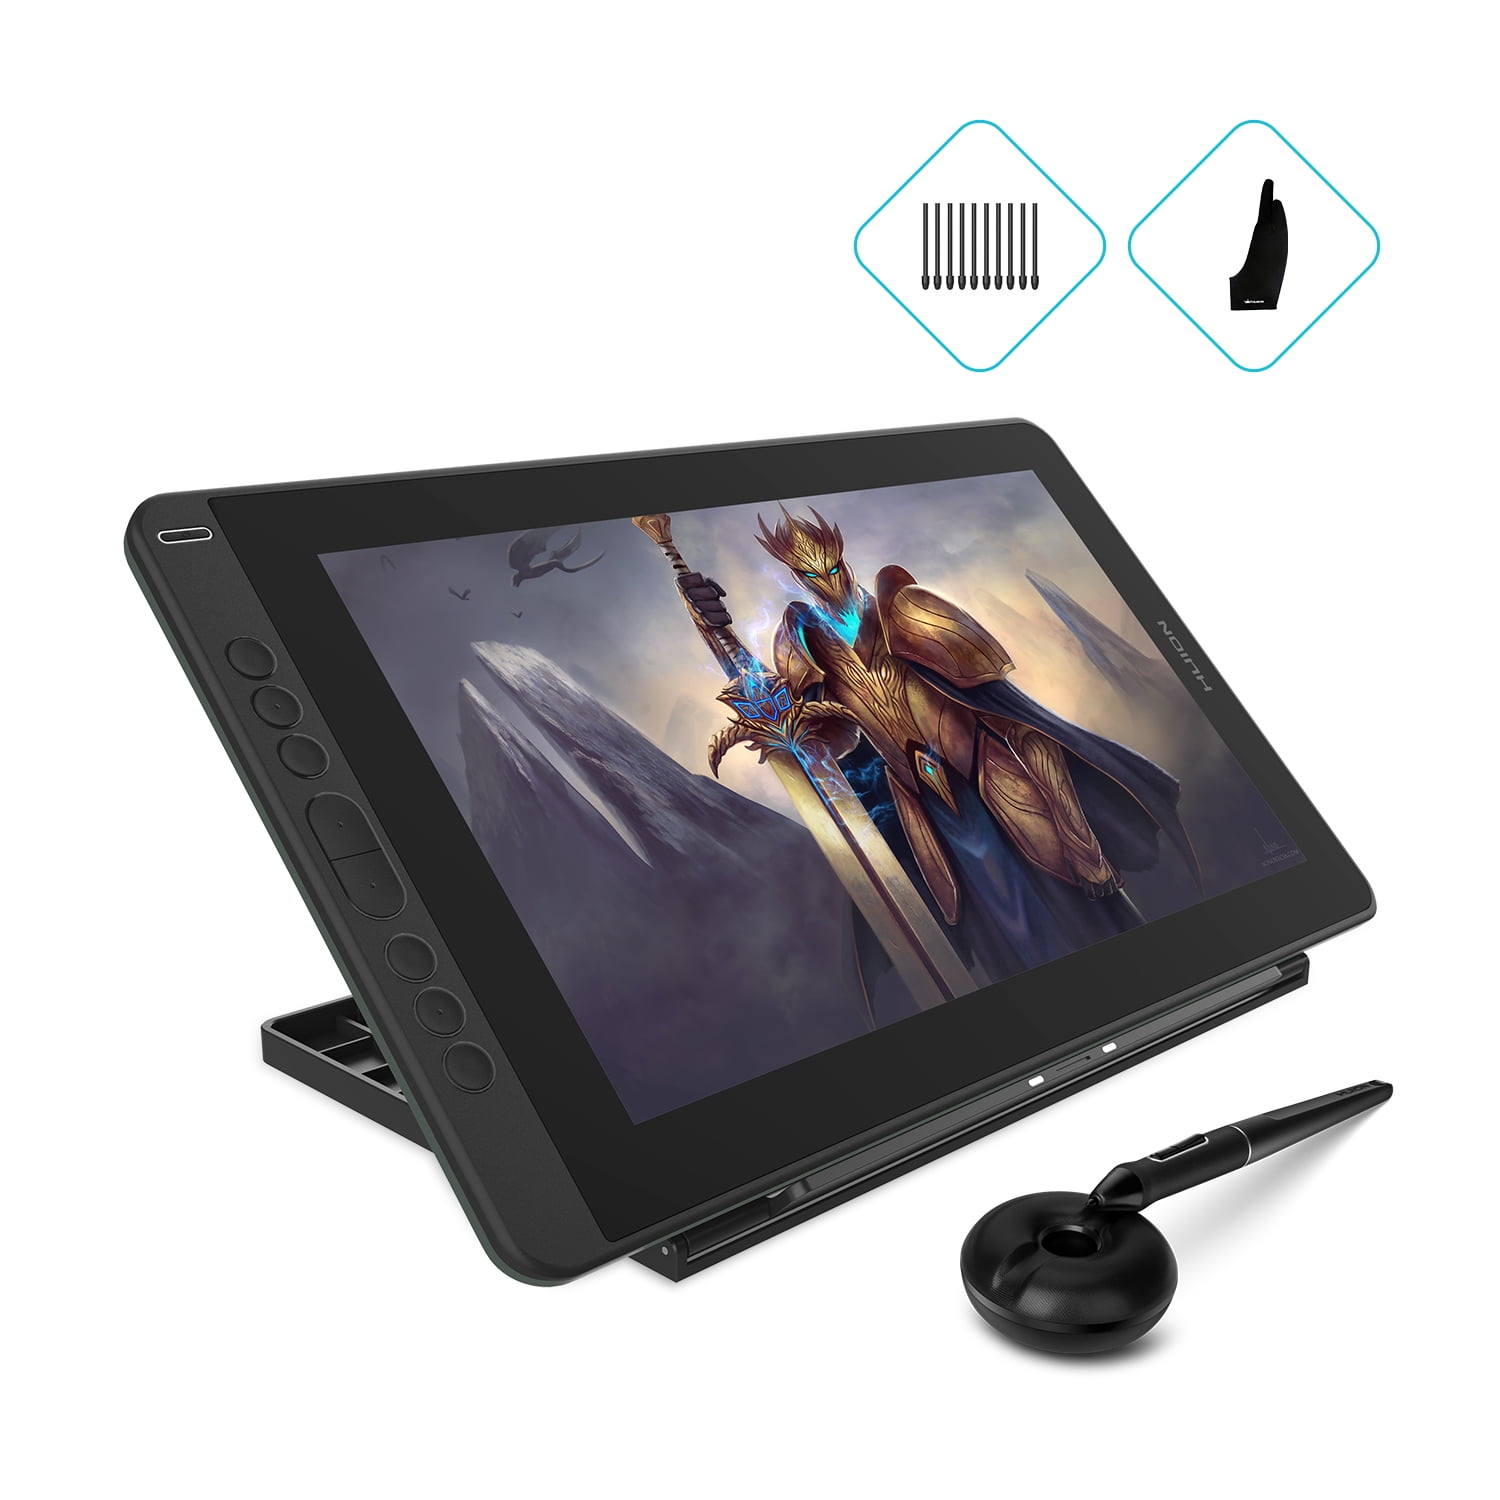 Huion KAMVAS 13 Graphics Drawing Pen Display Drawing Tablet Monitor+Stand Purple